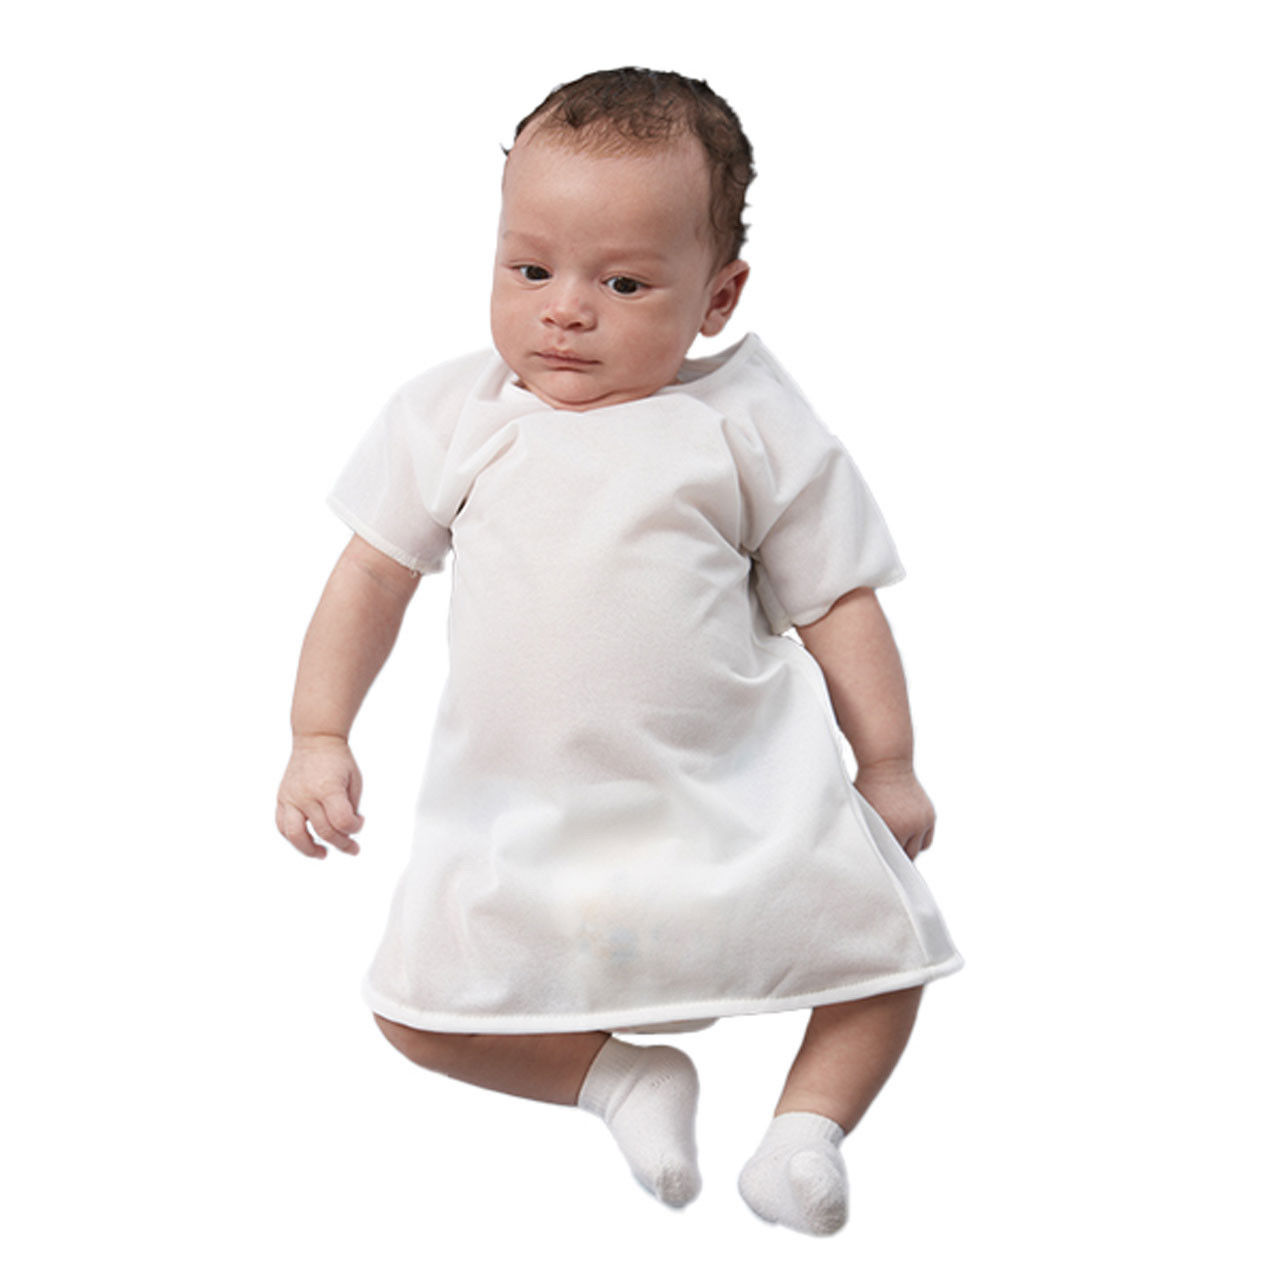 What are the features of the baby hospital gown in the bulk Pediatric Hospital Gowns?